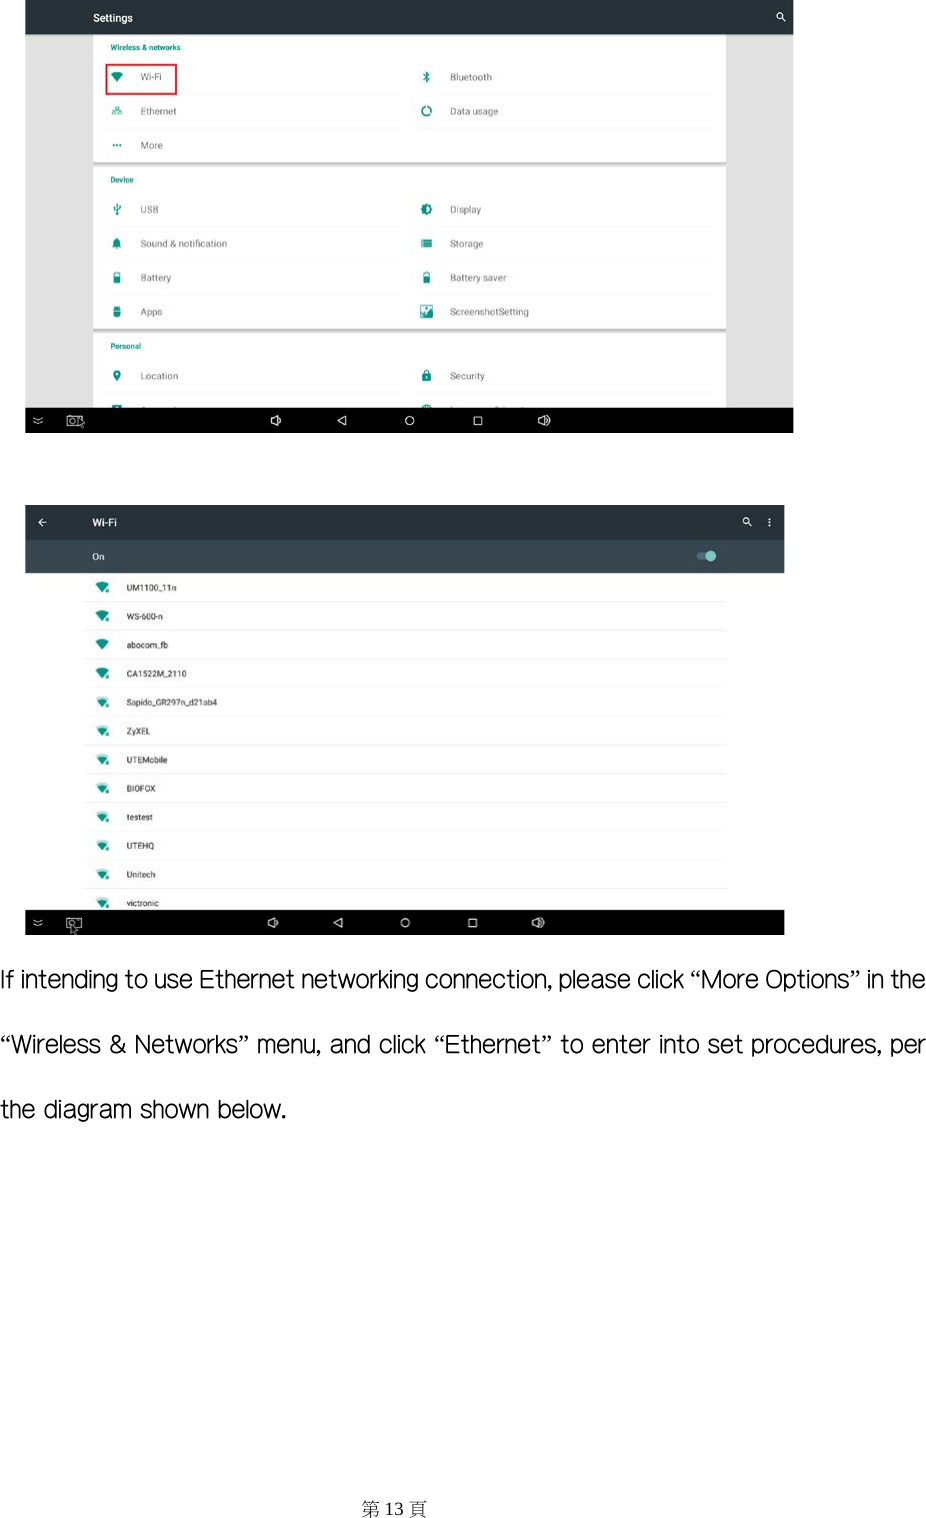    If intending to use Ethernet networking connection, please click “More Options” in the “Wireless &amp; Networks” menu, and click “Ethernet” to enter into set procedures, per the diagram shown below. 第13 頁 